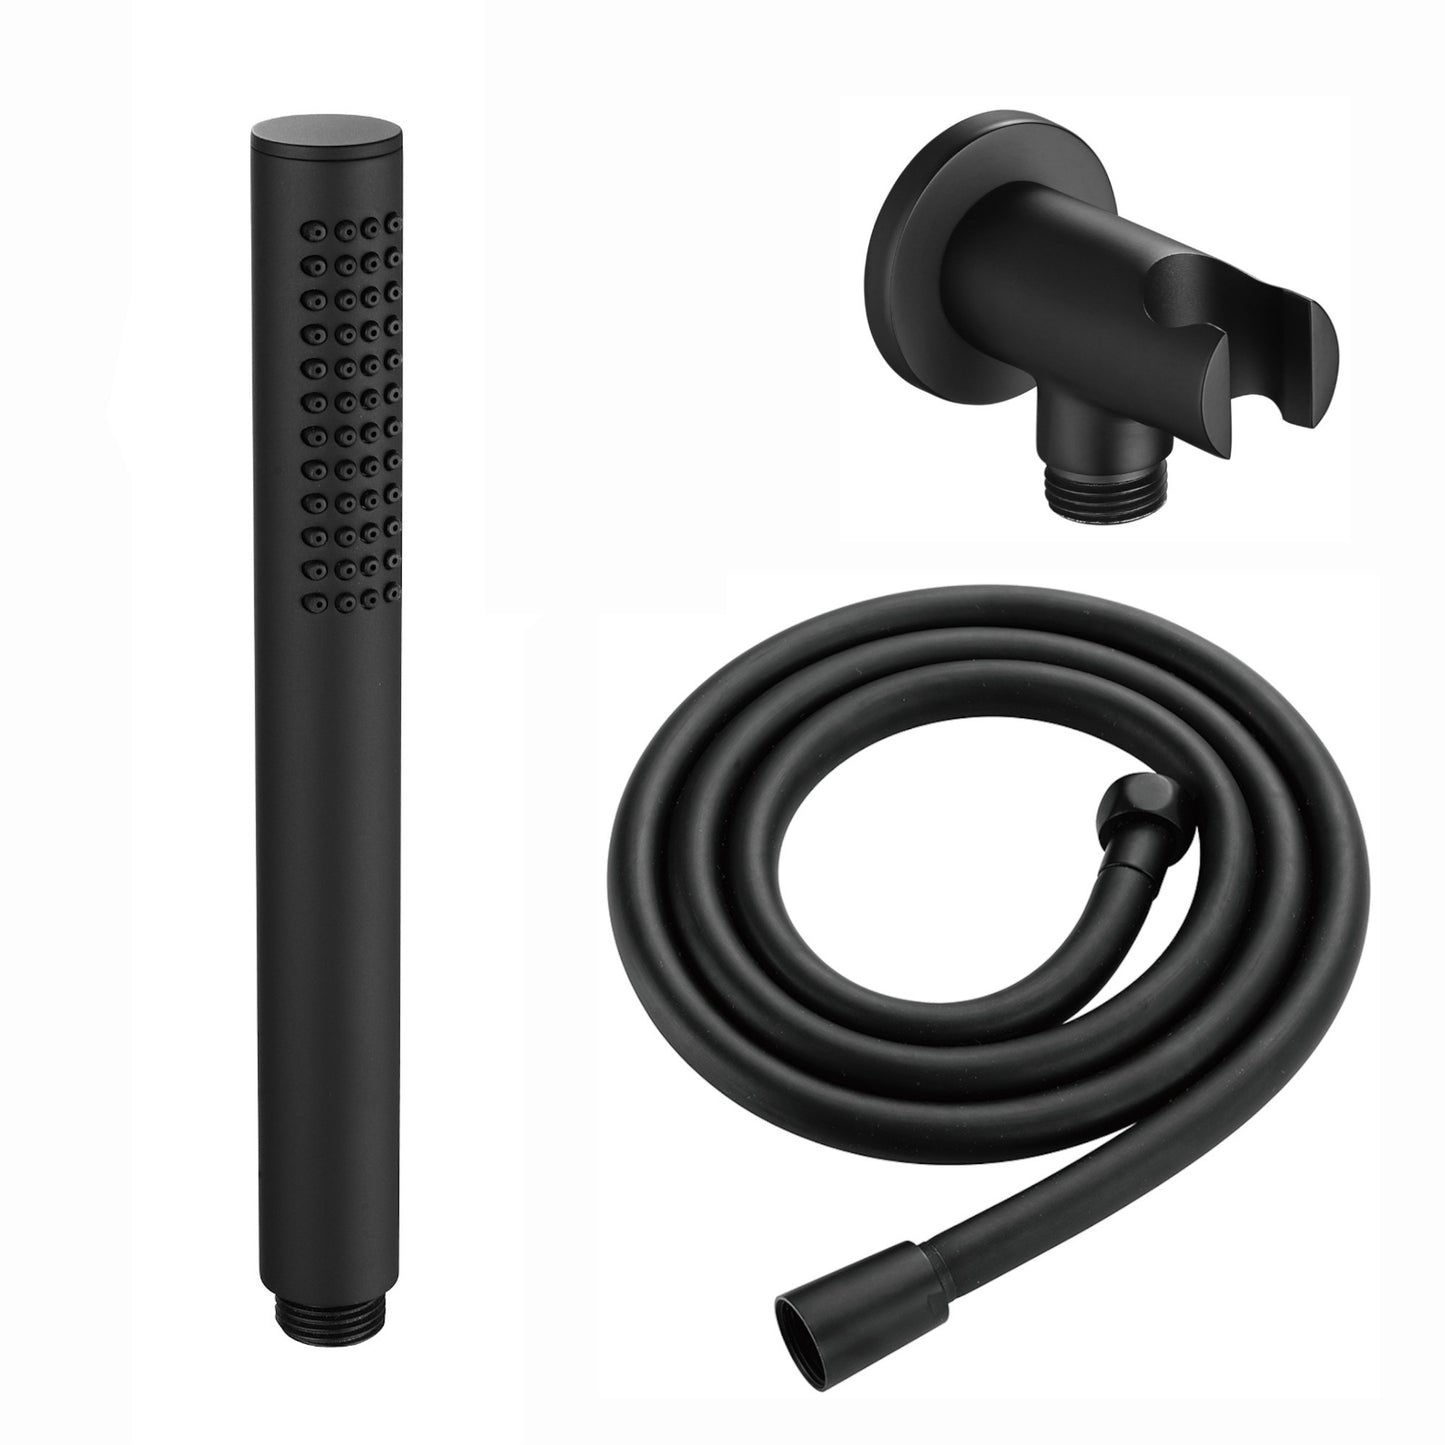 Venice Contemporary Round Concealed Thermostatic Shower Set Incl. Triple Diverter Valve, Wall Fixed 8" Shower Head, Handshower Kit, Bath Filler Waste with Overflow - Matte Black (3 Outlet)